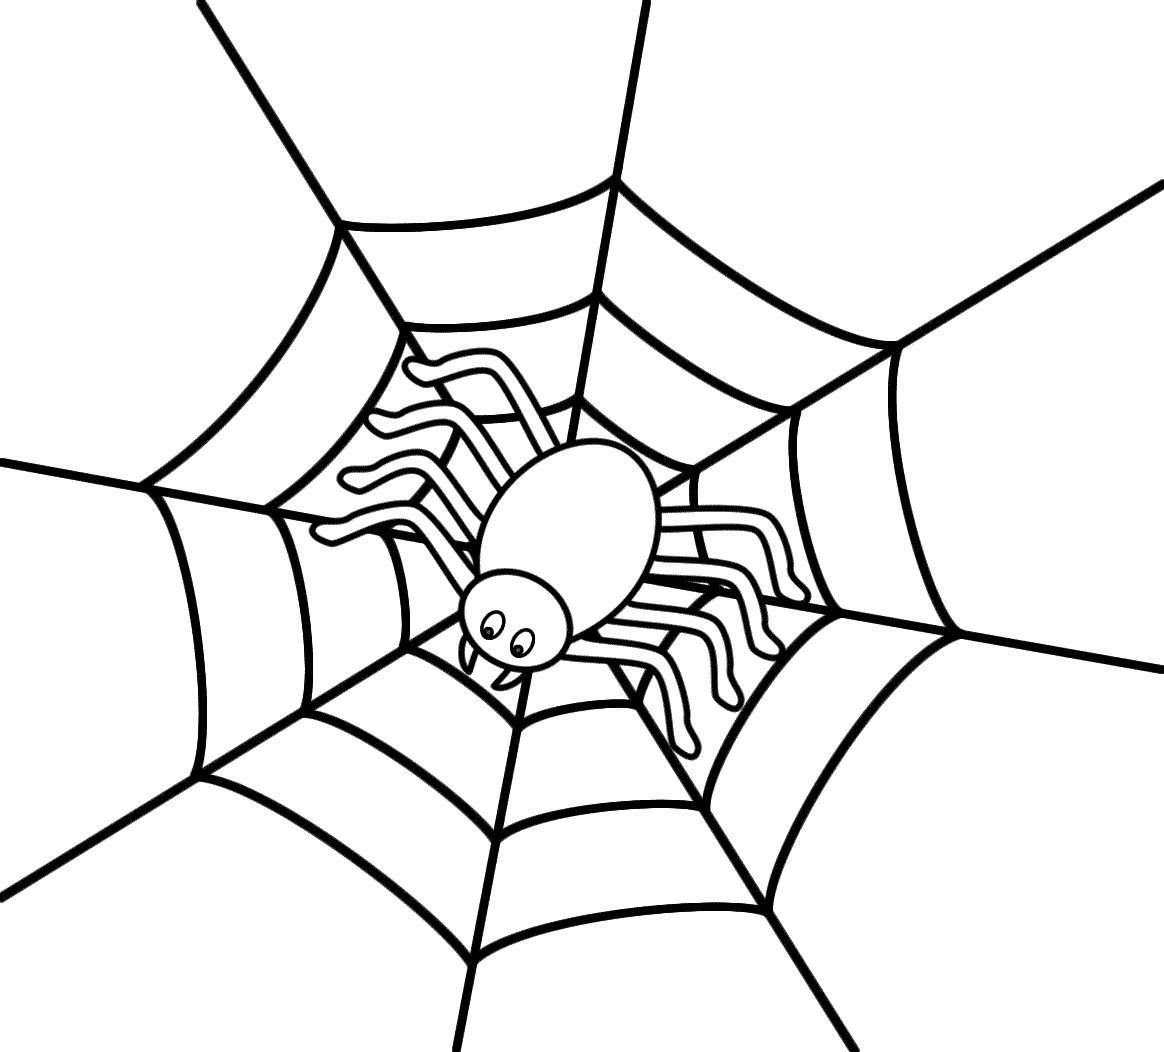 Spider on a web - Coloring Pages